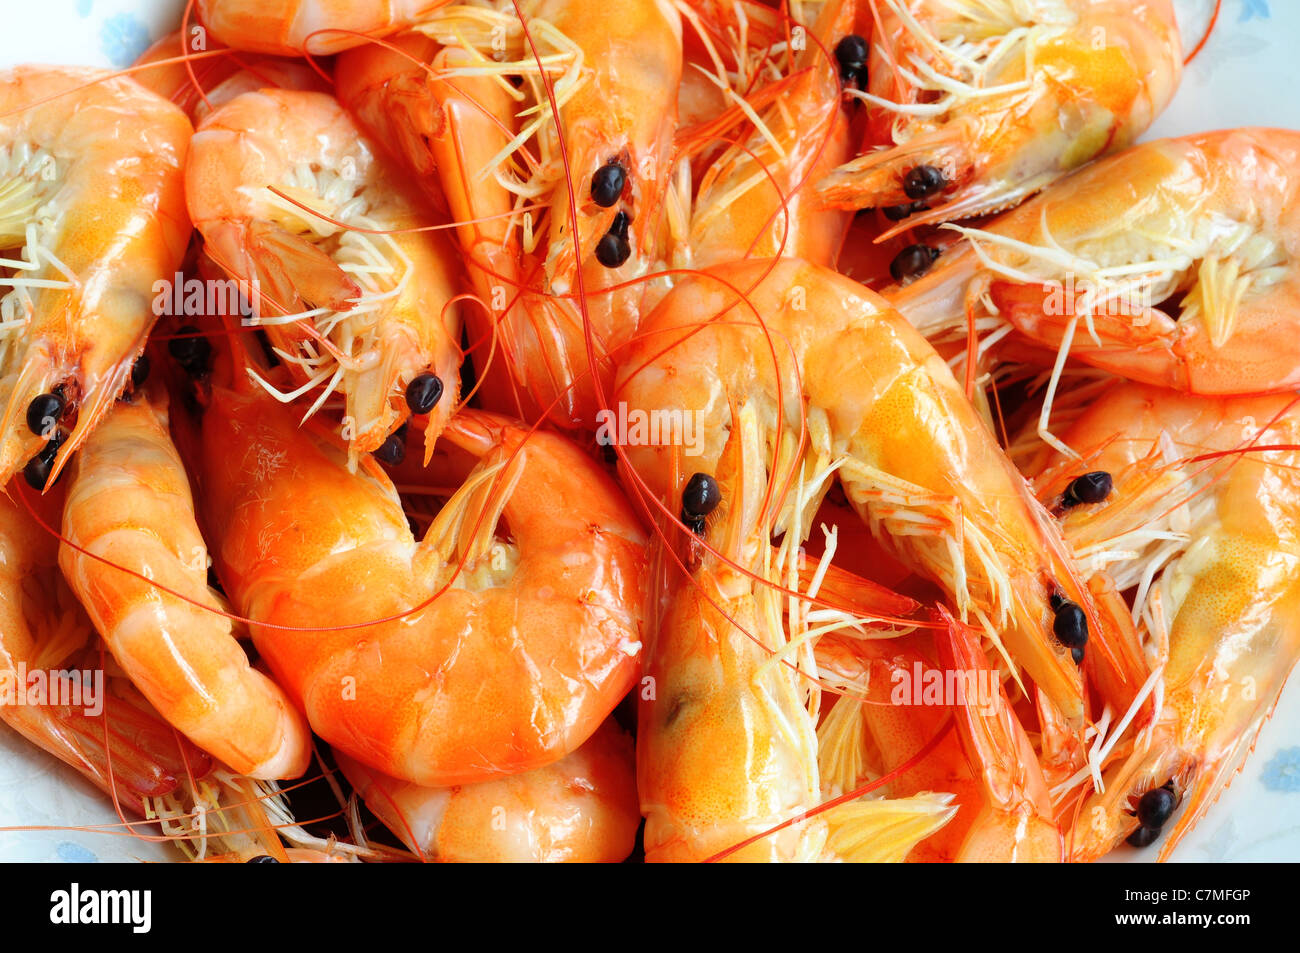 Many steamed raw shrimp in a pile Stock Photo